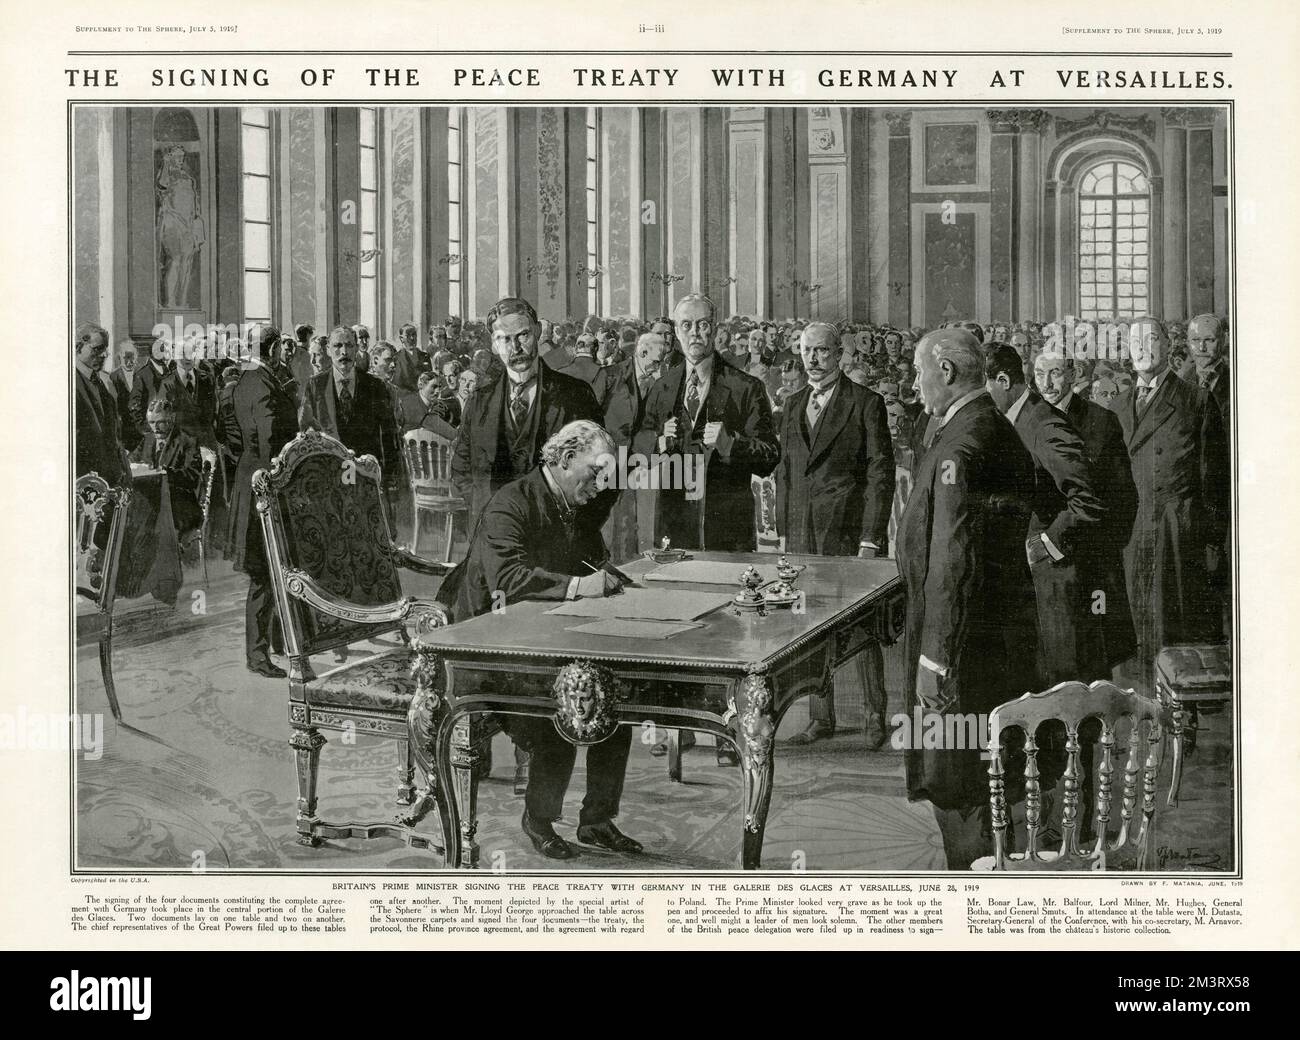 The Signing of the Peace Treaty with Germany at Versailles.  Britain's Prime Minister signing the peace treaty with Germany in the Galerie des Glaces at Versailles, June 28, 1919.  British Prime Minister David Lloyd George is pictured seated and signing the documents, while the chief representatives of the Great Powers  file up to the table.  Just behind Lloyd George, from left, Andrew Bonar Law, Arthur Balfour, Lord Milner, Billy Hughes, Australian Prime Minister, General Botha, and General Smuts.  Also in attendance were M. Dutasta, Secretary-General of the Conference with his co-secretary, Stock Photo